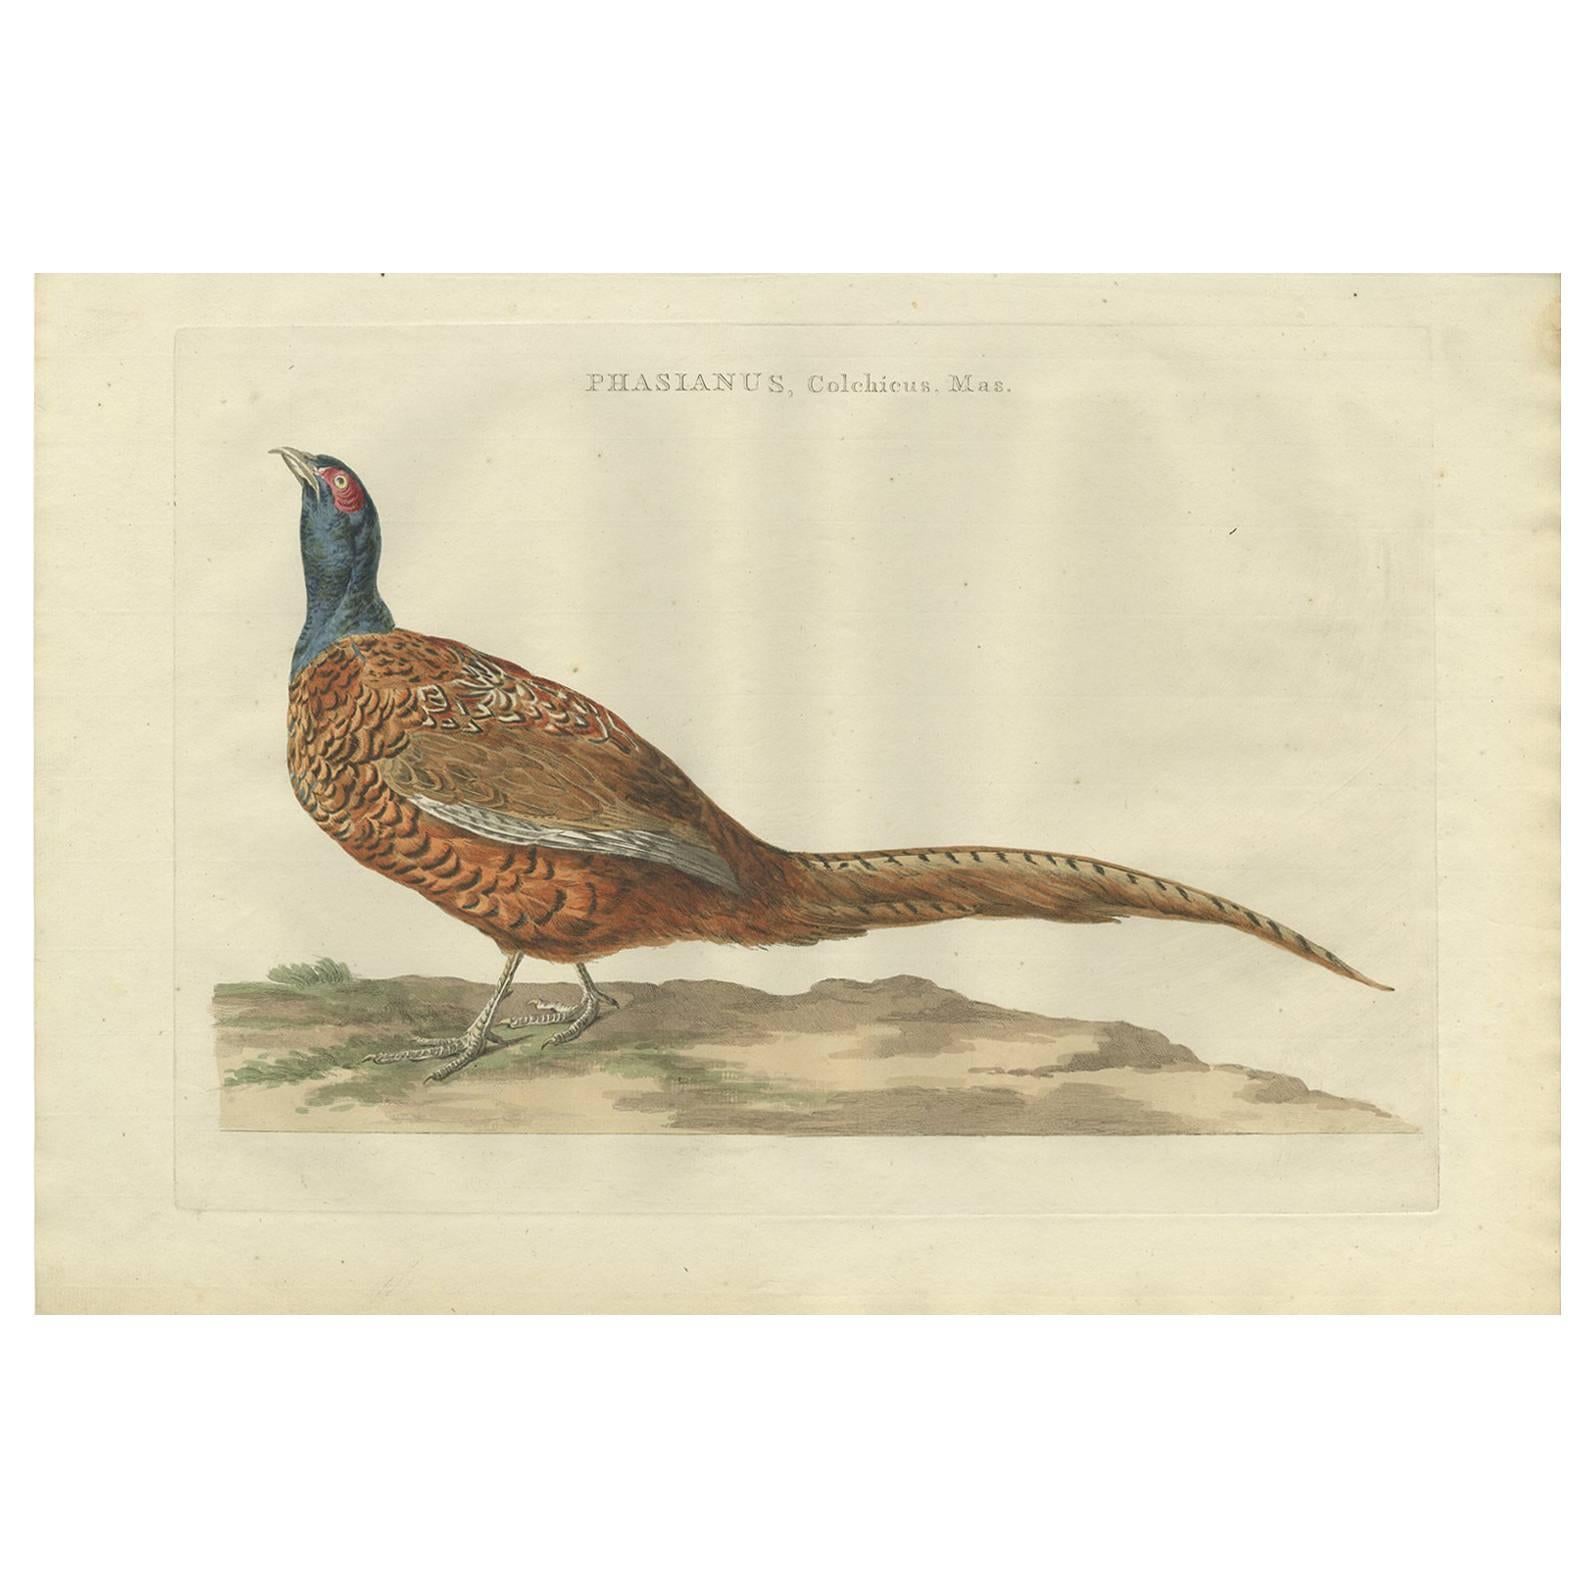 Antique Bird Print of the Common Pheasant 'Male' by Sepp & Nozeman, 1789